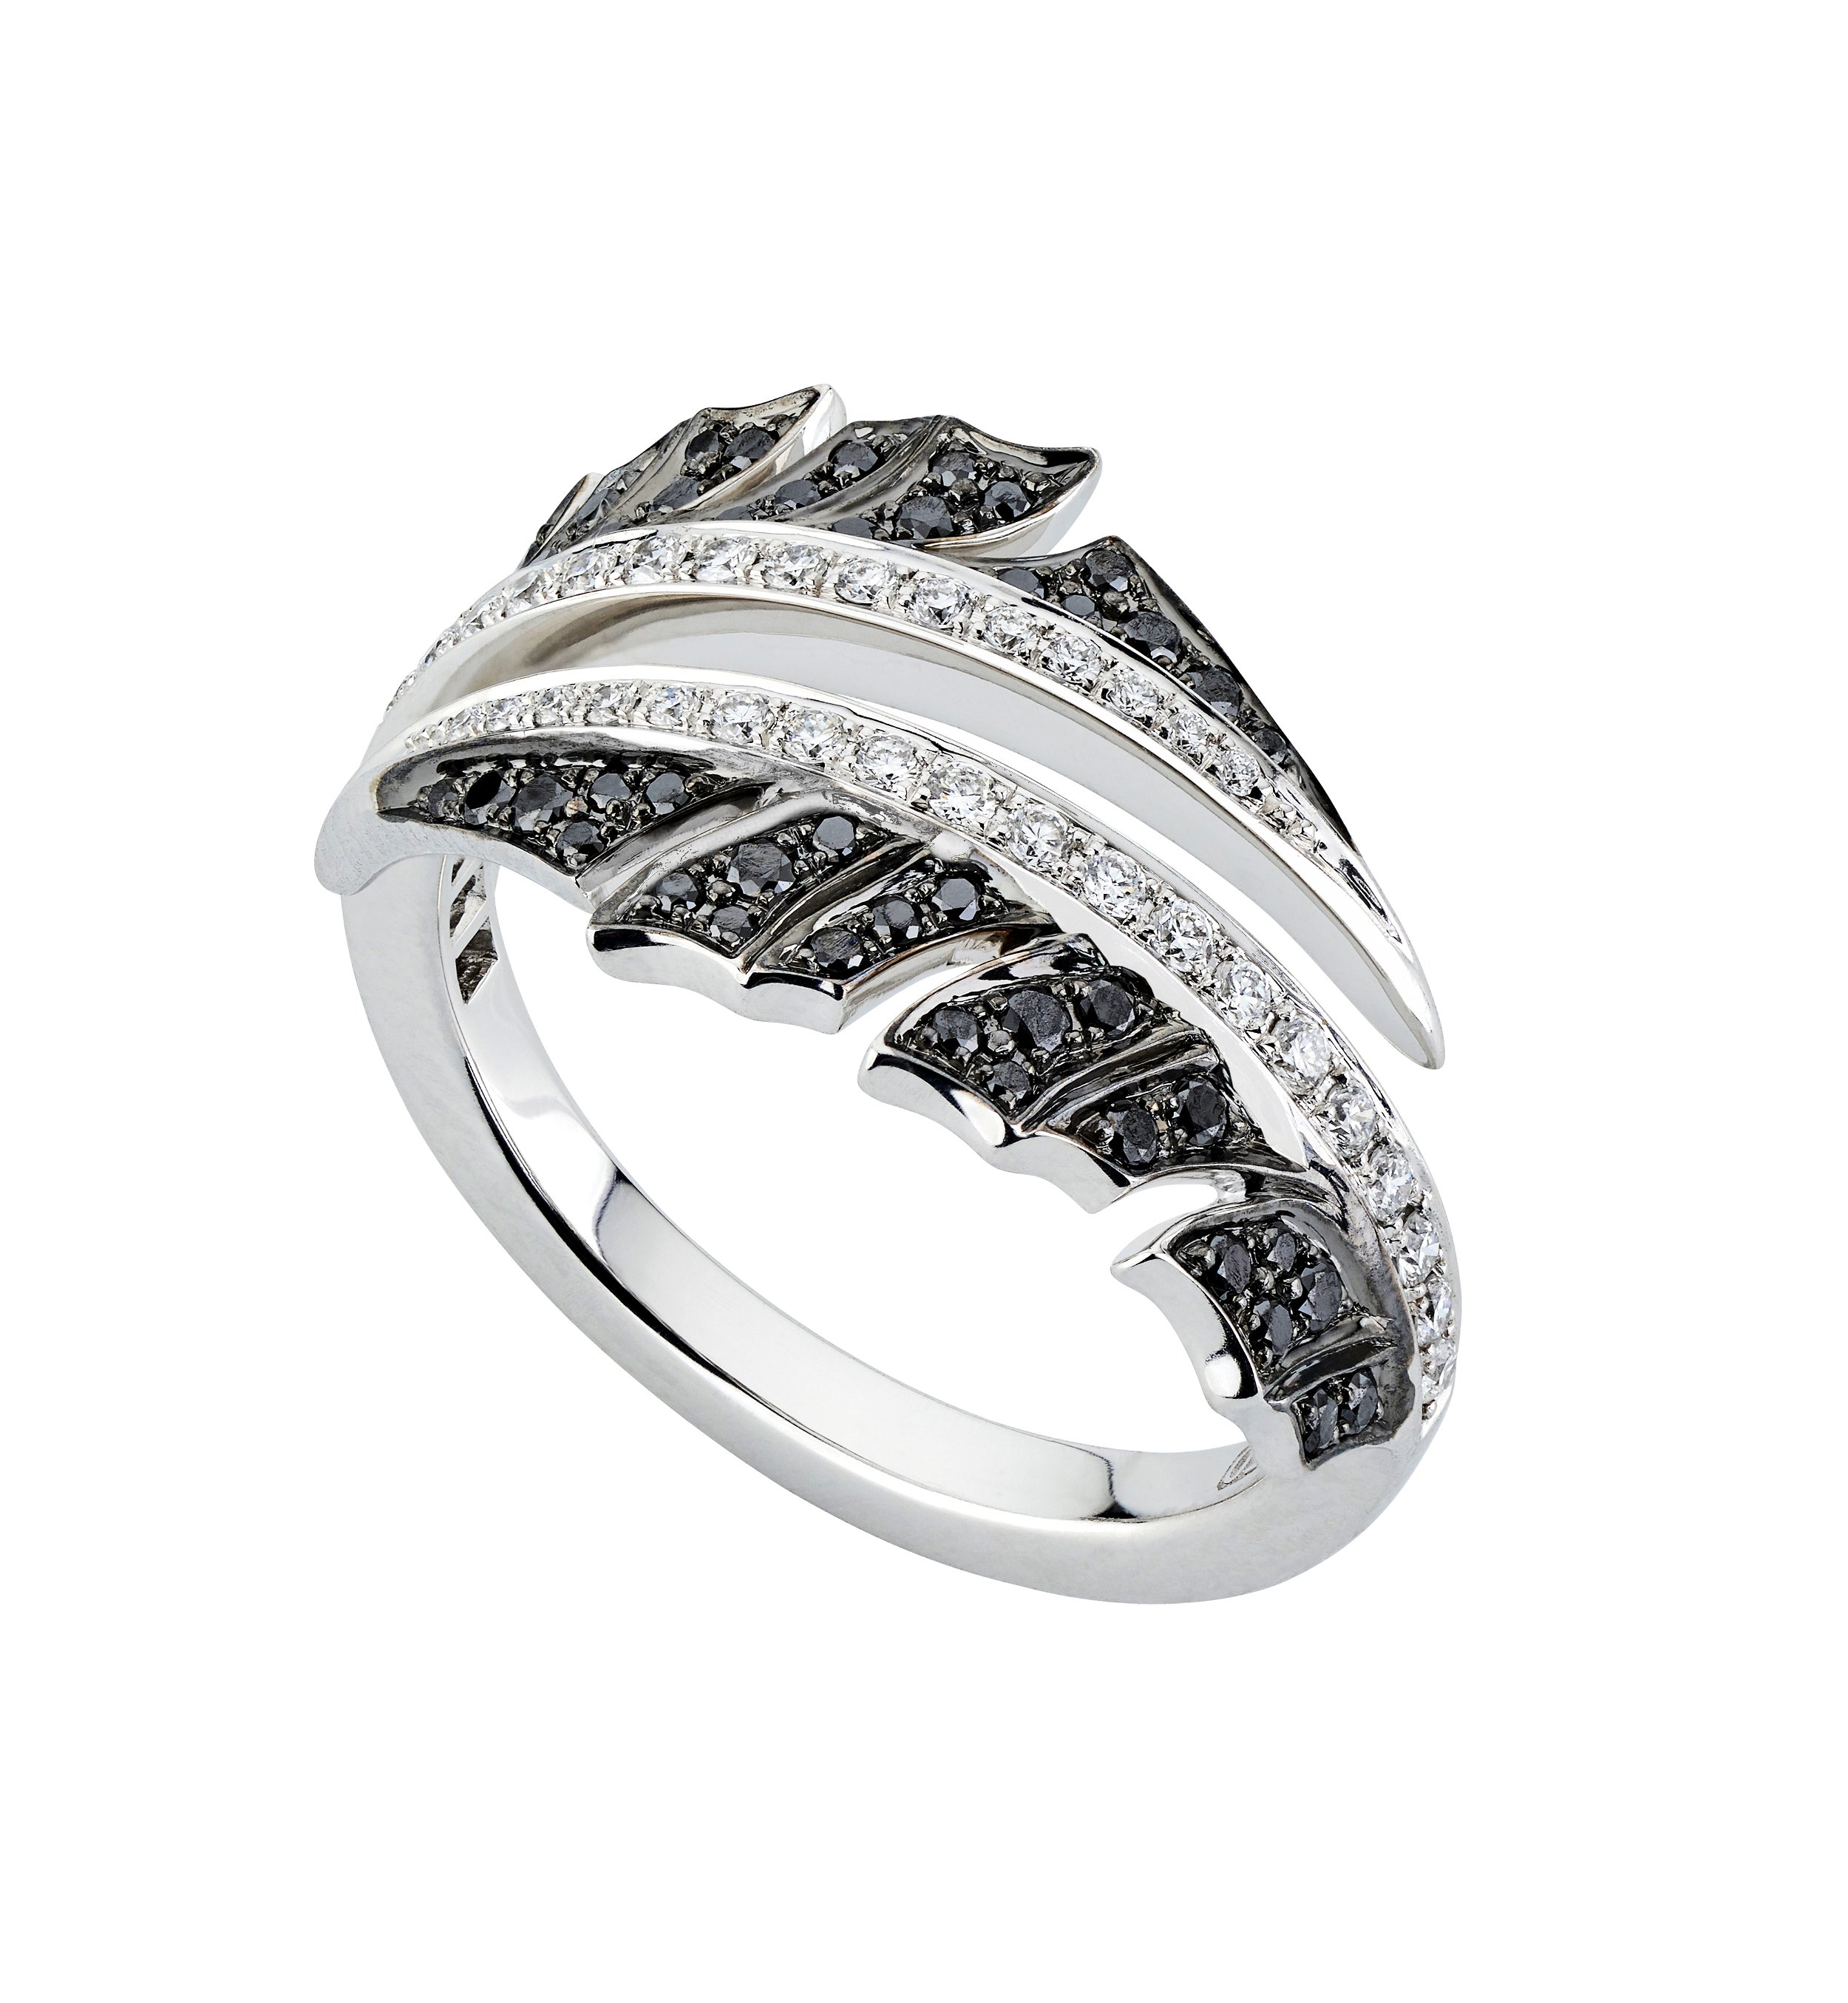 Magnipheasant Plume Split Ring with White and Black Diamonds in 18kt White Gold - Size 7